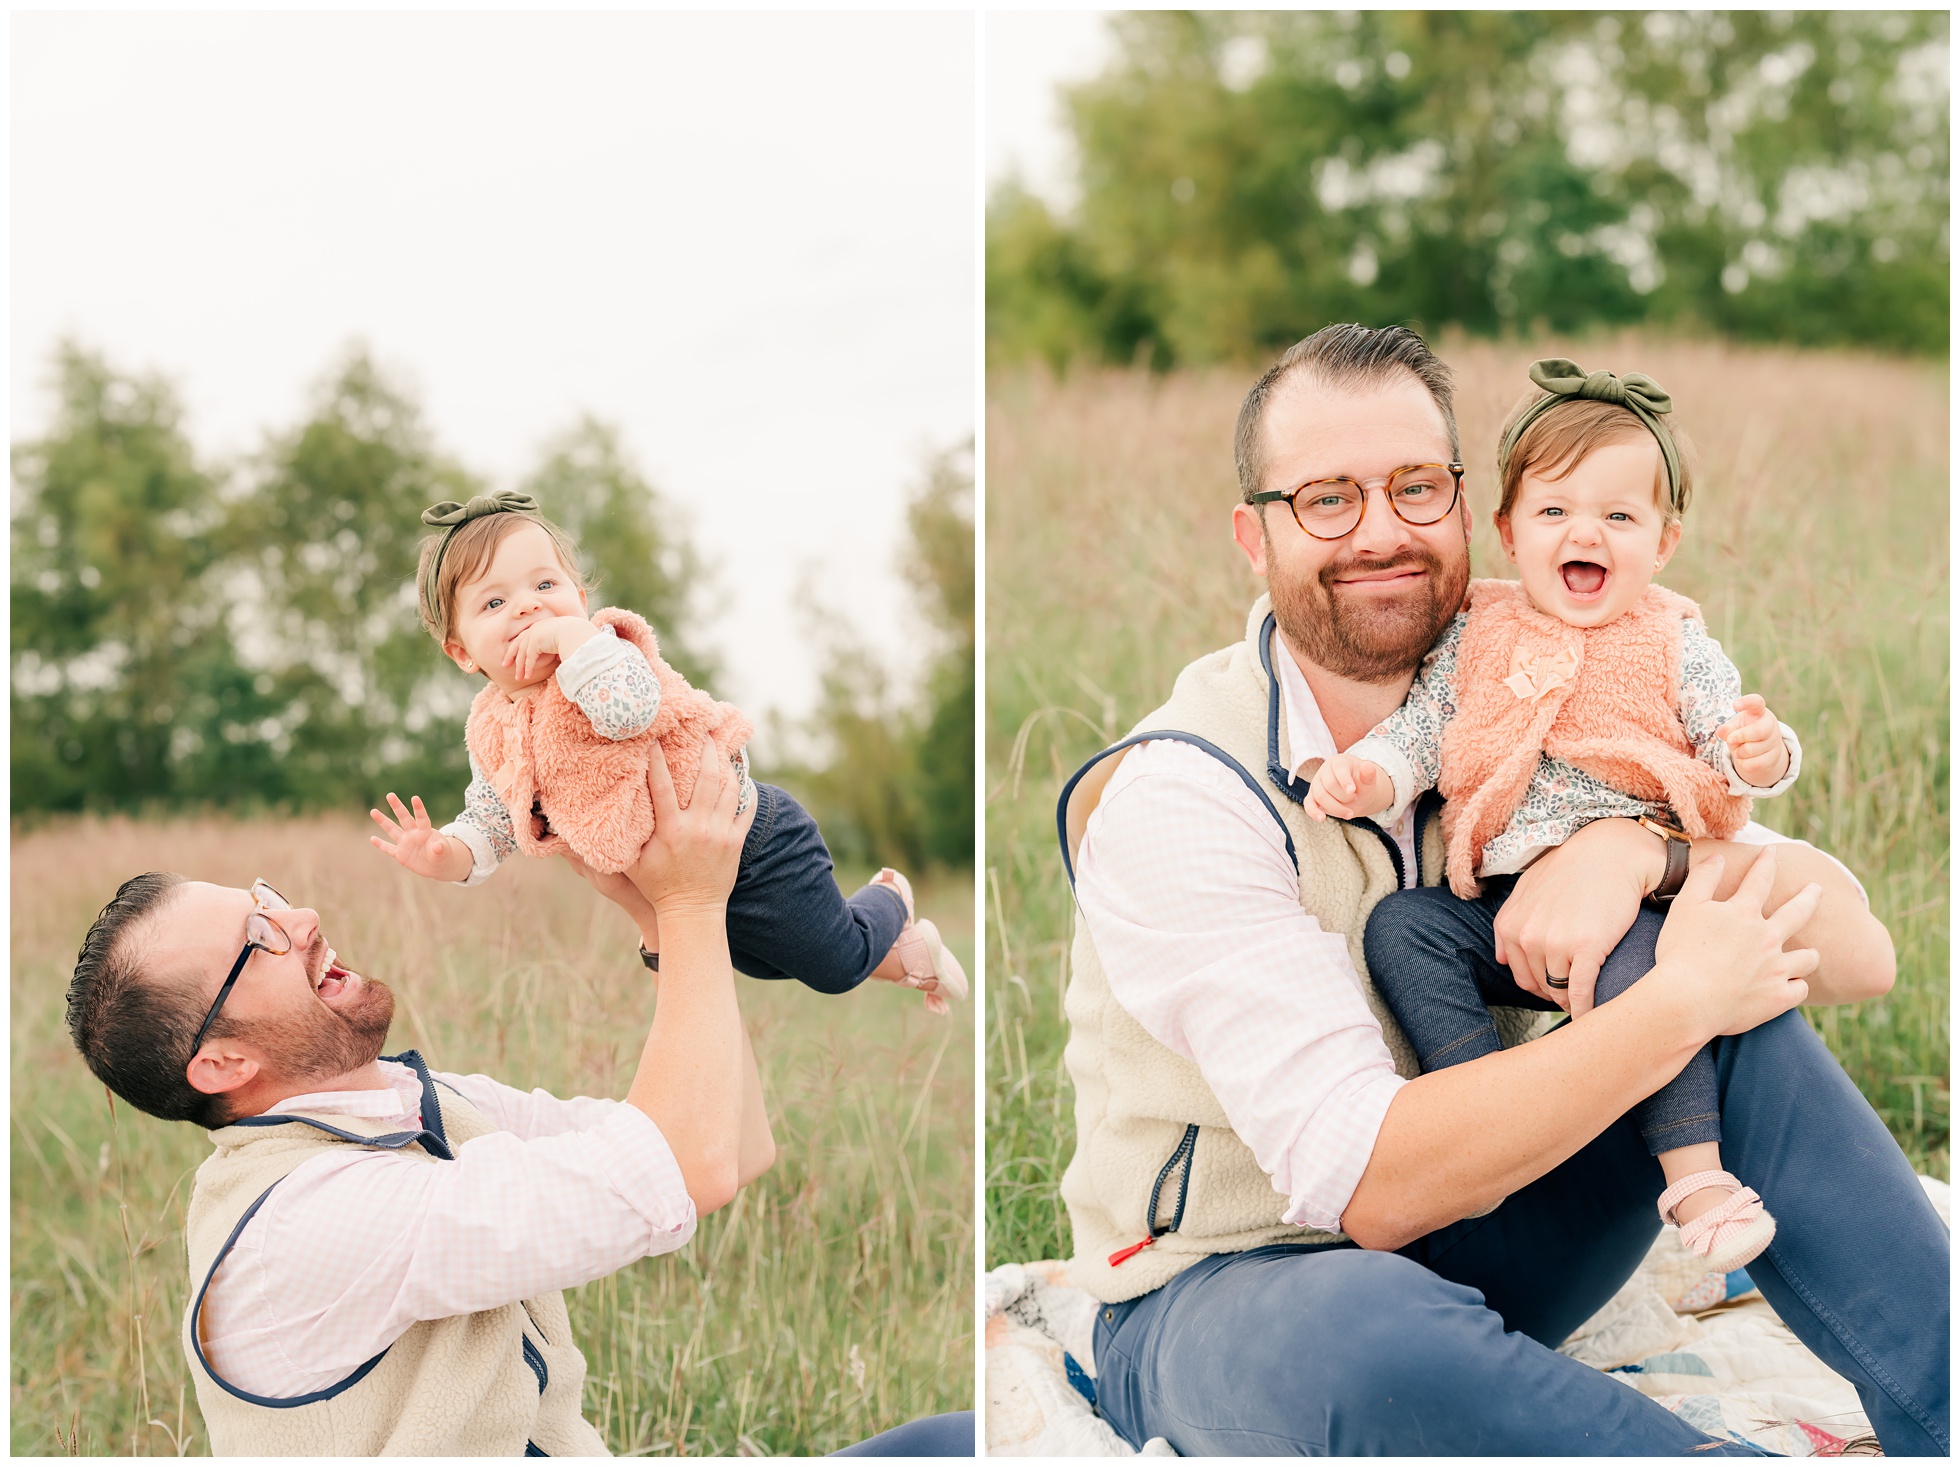 Outdoor family photography locations the Woodlands